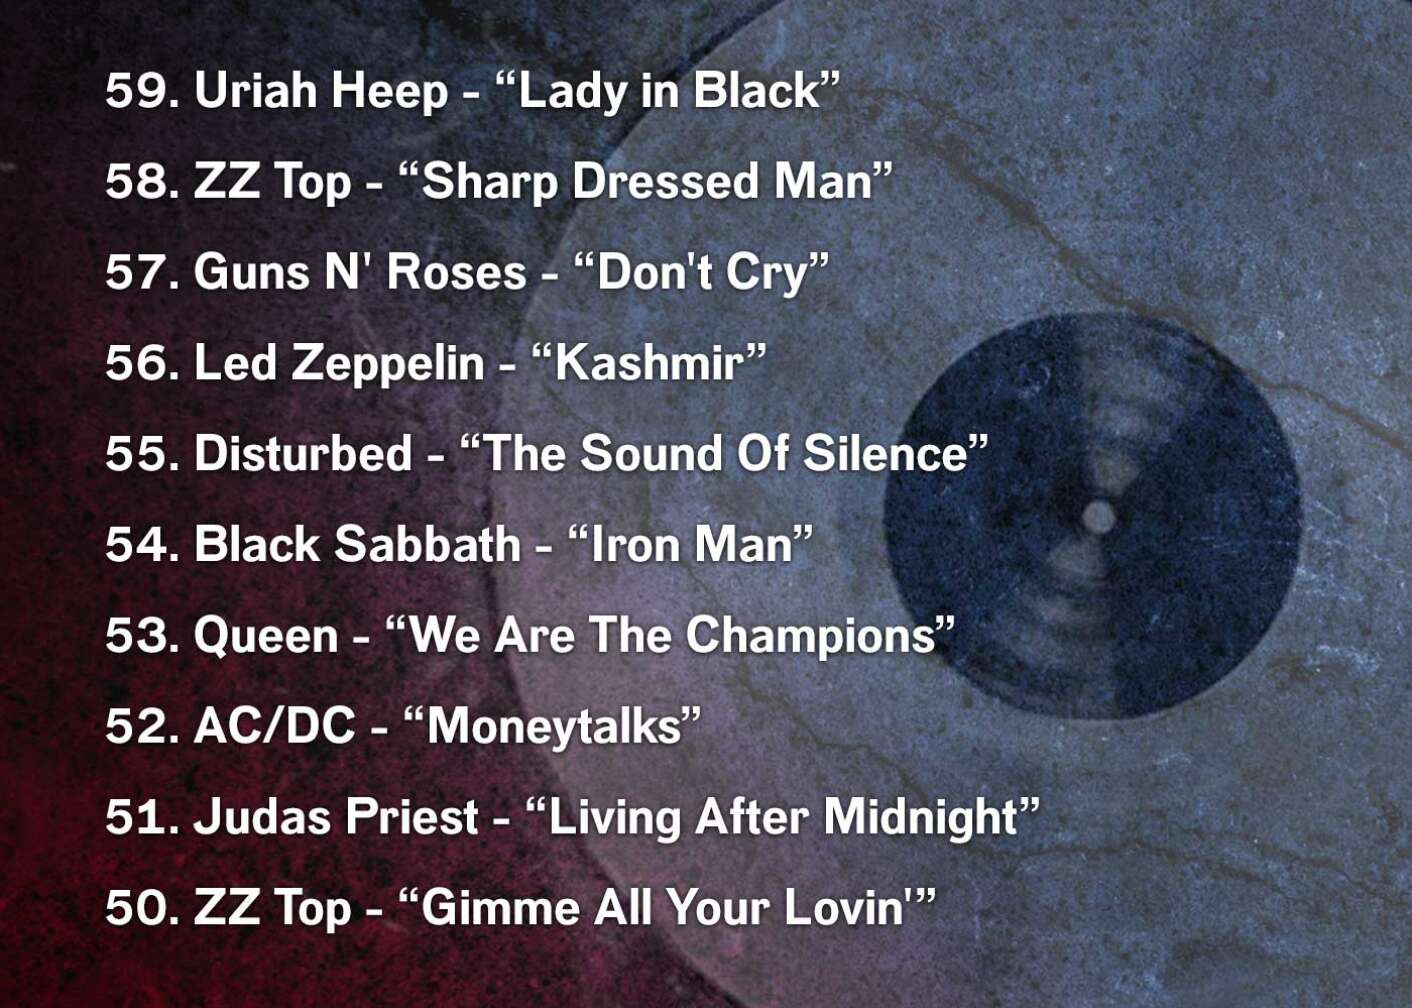 59. Uriah Heep - “Lady in Black” 58. ZZ Top - “Sharp Dressed Man” 57. Guns N' Roses - “Don't Cry” 56. Led Zeppelin - “Kashmir” 55. Disturbed - “The Sound Of Silence” 54. Black Sabbath - “Iron Man” 53. Queen - “We Are The Champions” 52. AC/DC - “Moneytalks” 51. Judas Priest - “Living After Midnight” 50. ZZ Top - “Gimme All Your Lovin'”